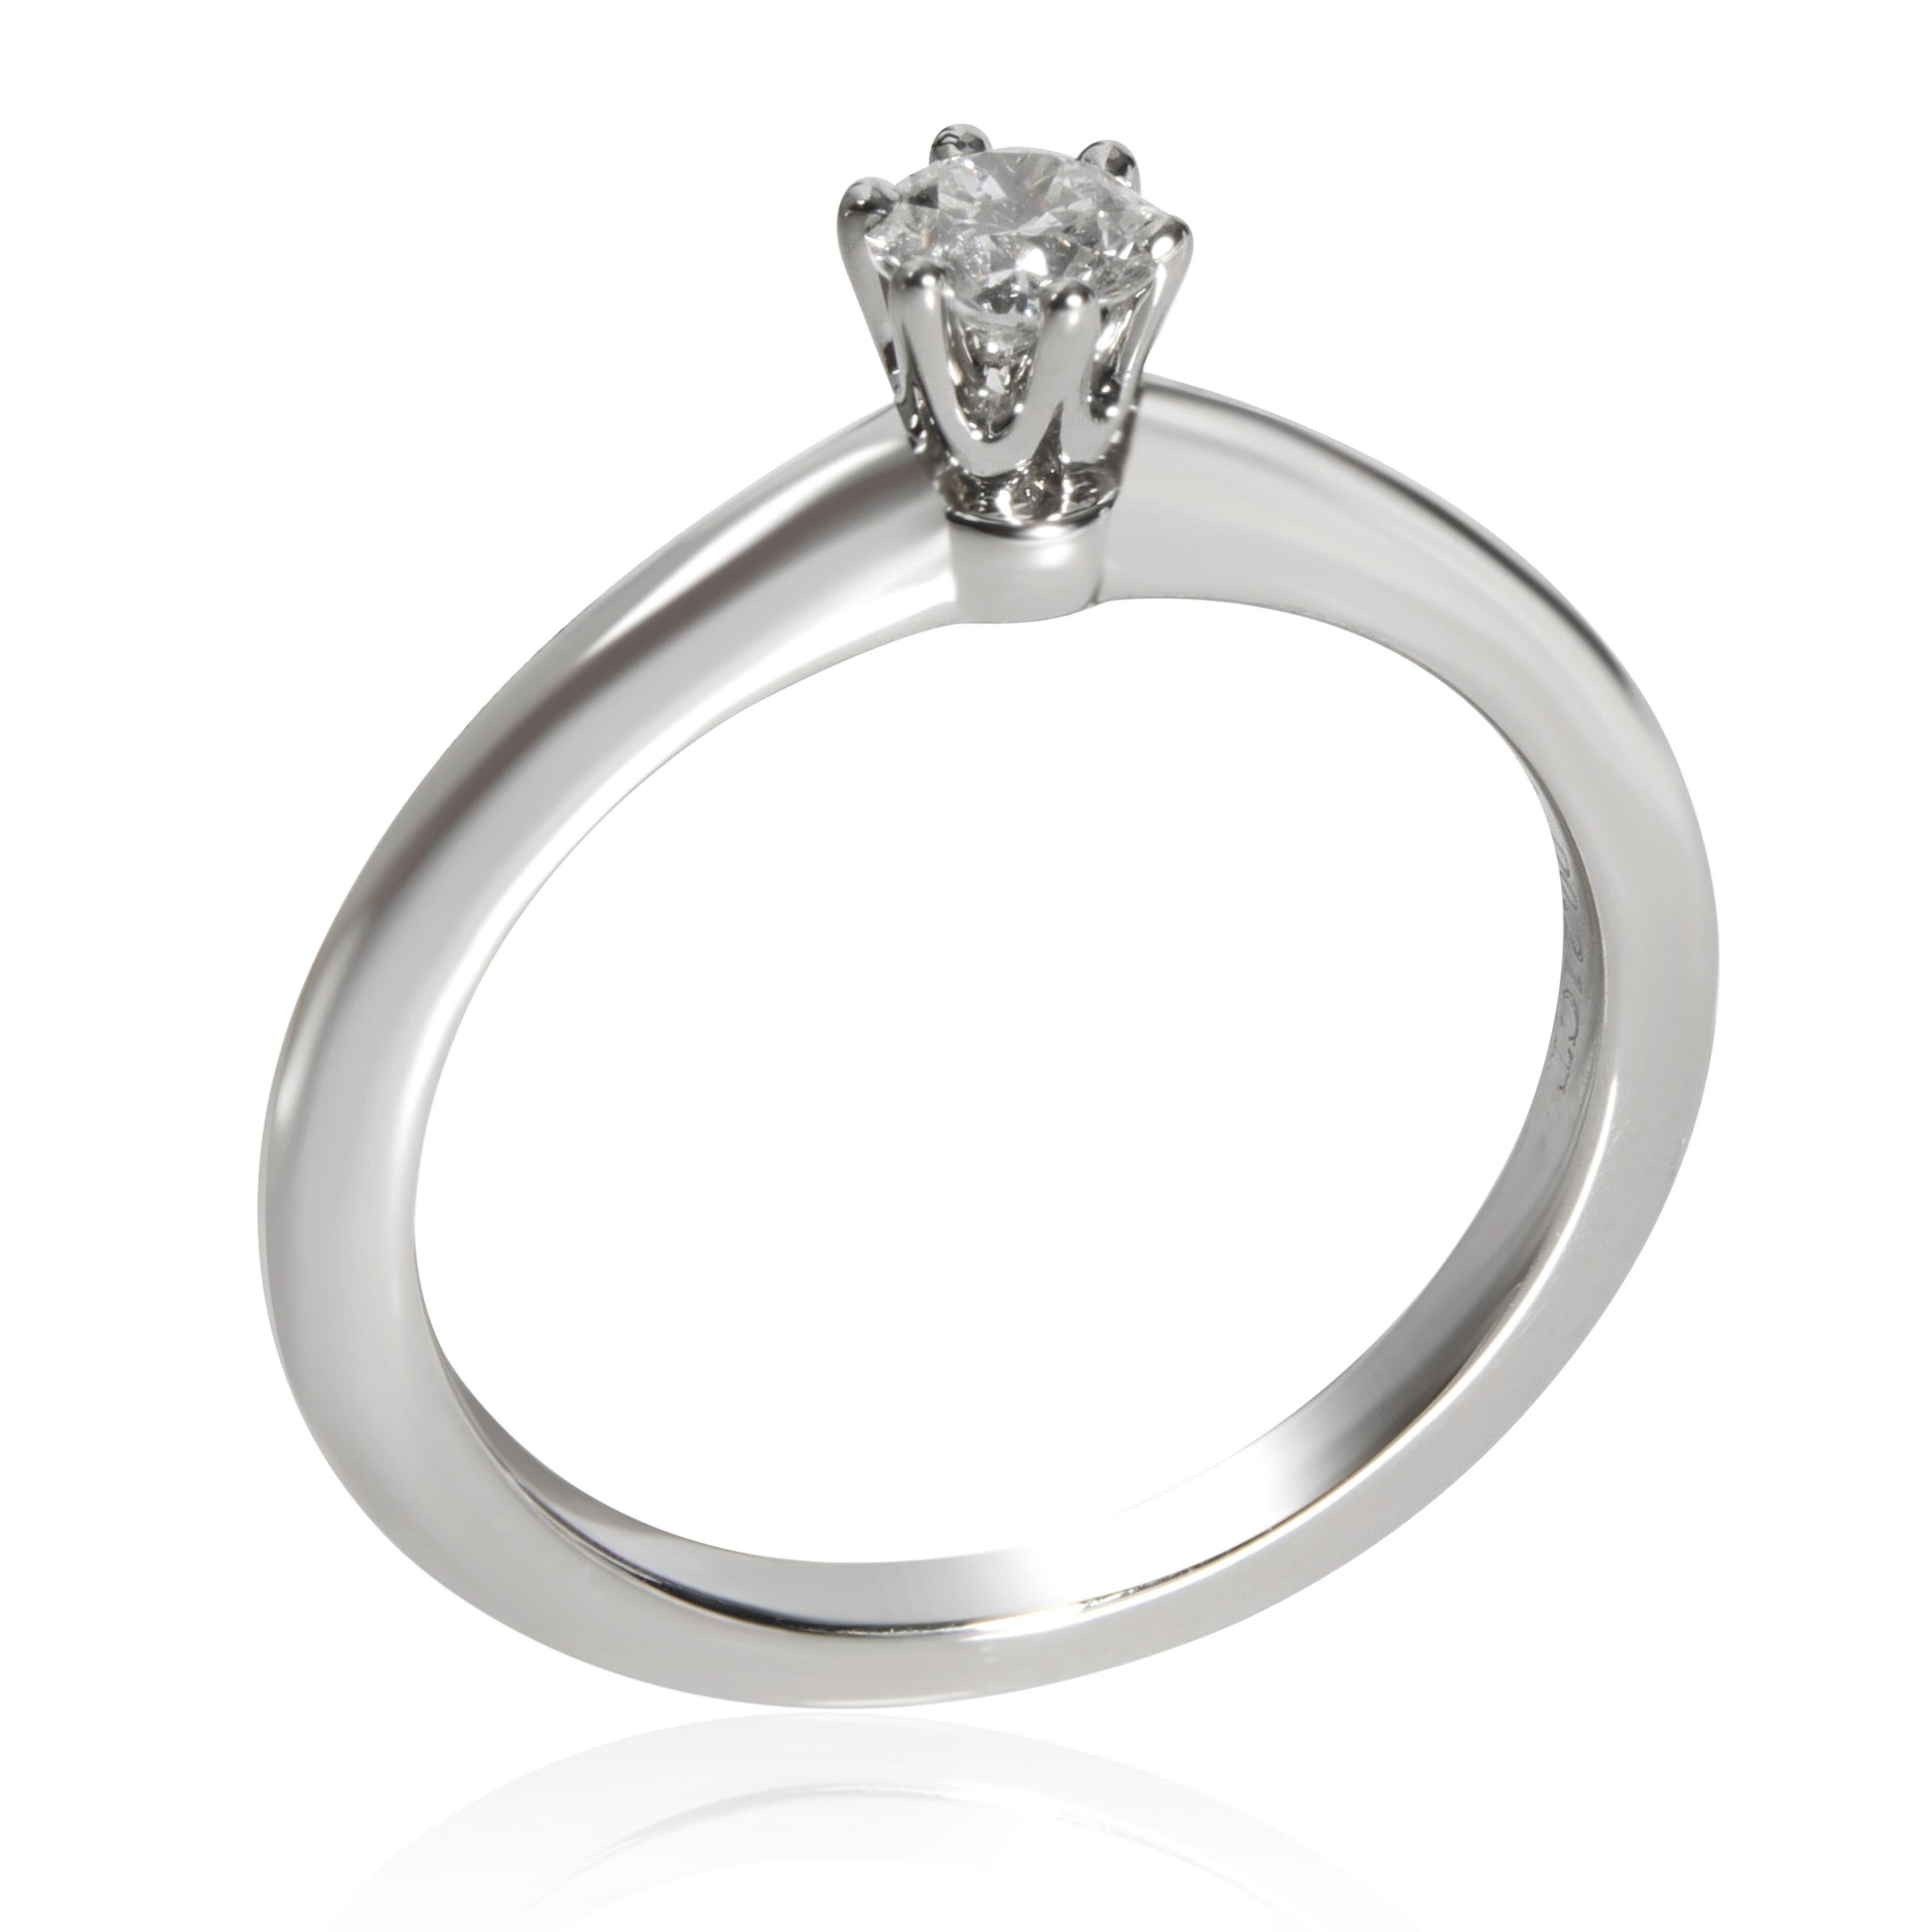 Modern Tiffany & Co. Solitaire Diamond Engagement Ring in Platinum G VVS2 0.21 CTW